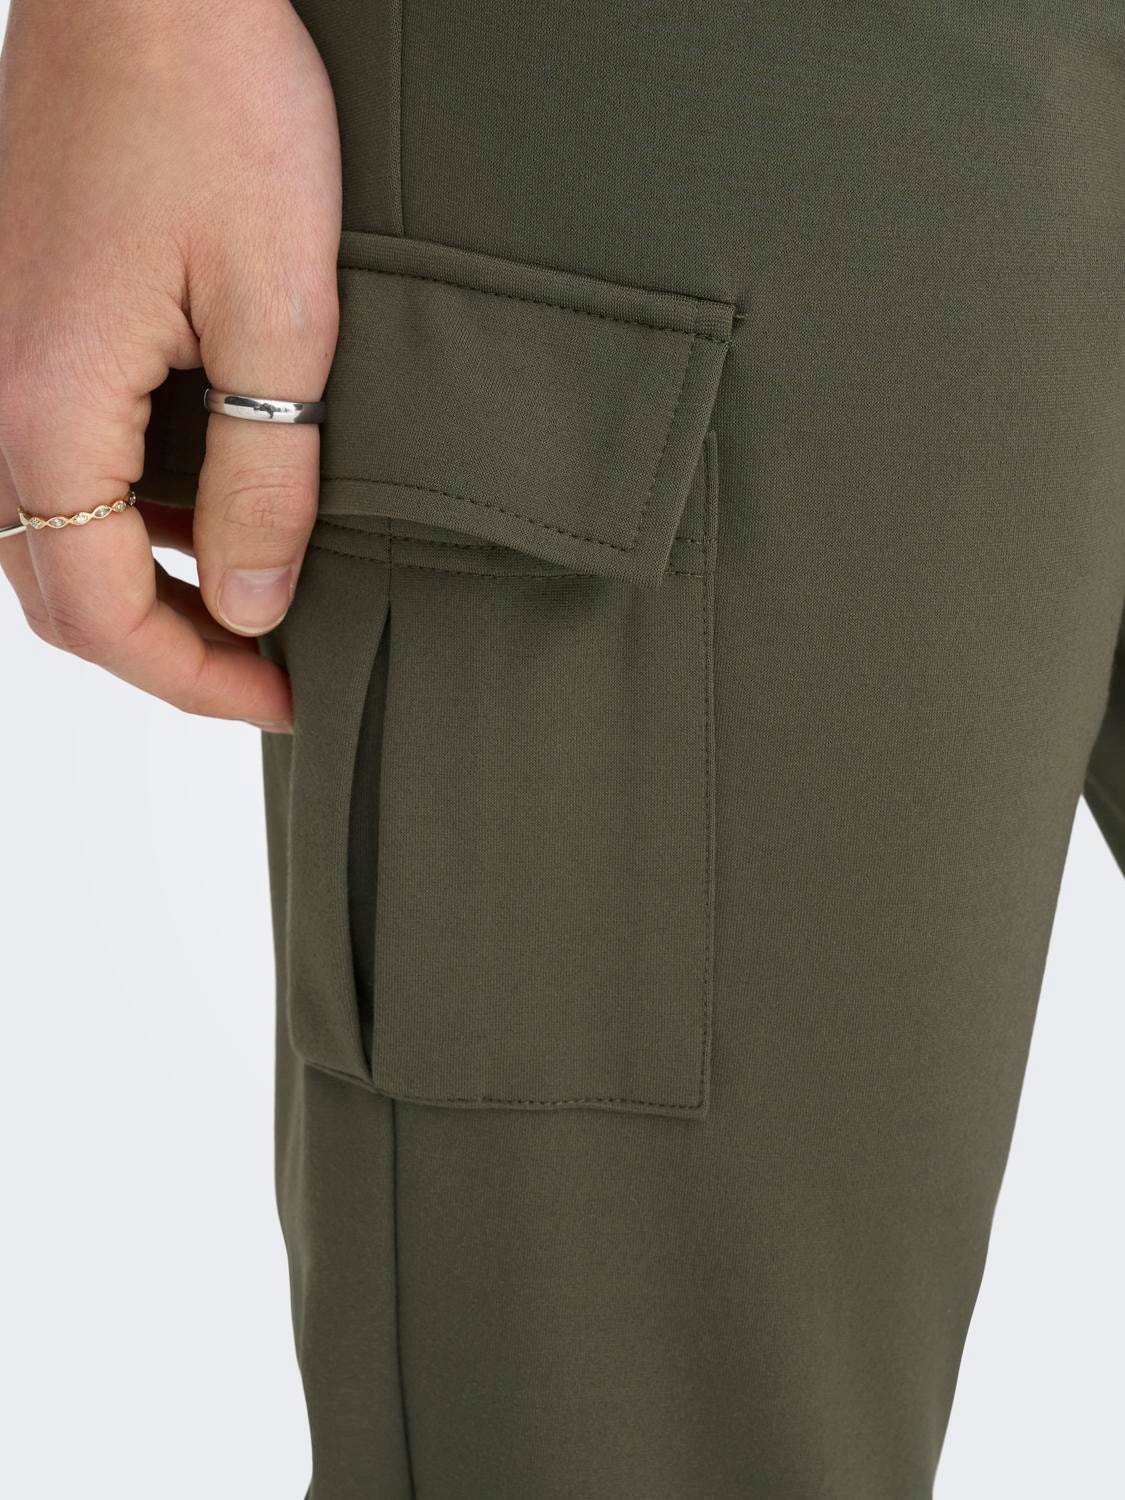 ONLY Poptrash Cargopants -Bungee Cord - 15225893